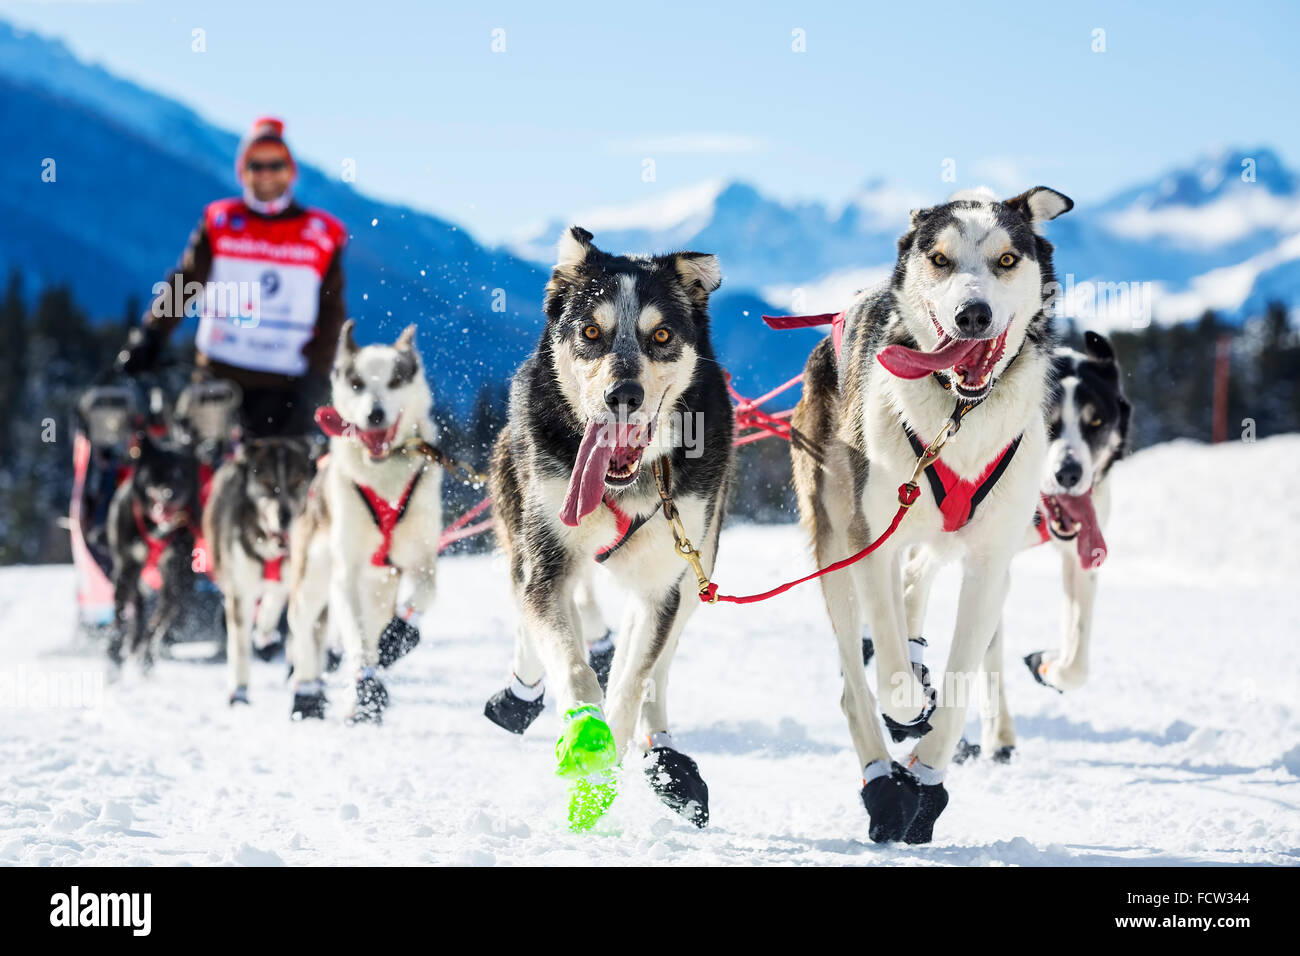 musher hiding behind sleigh at sled dog race on snow Stock Photo